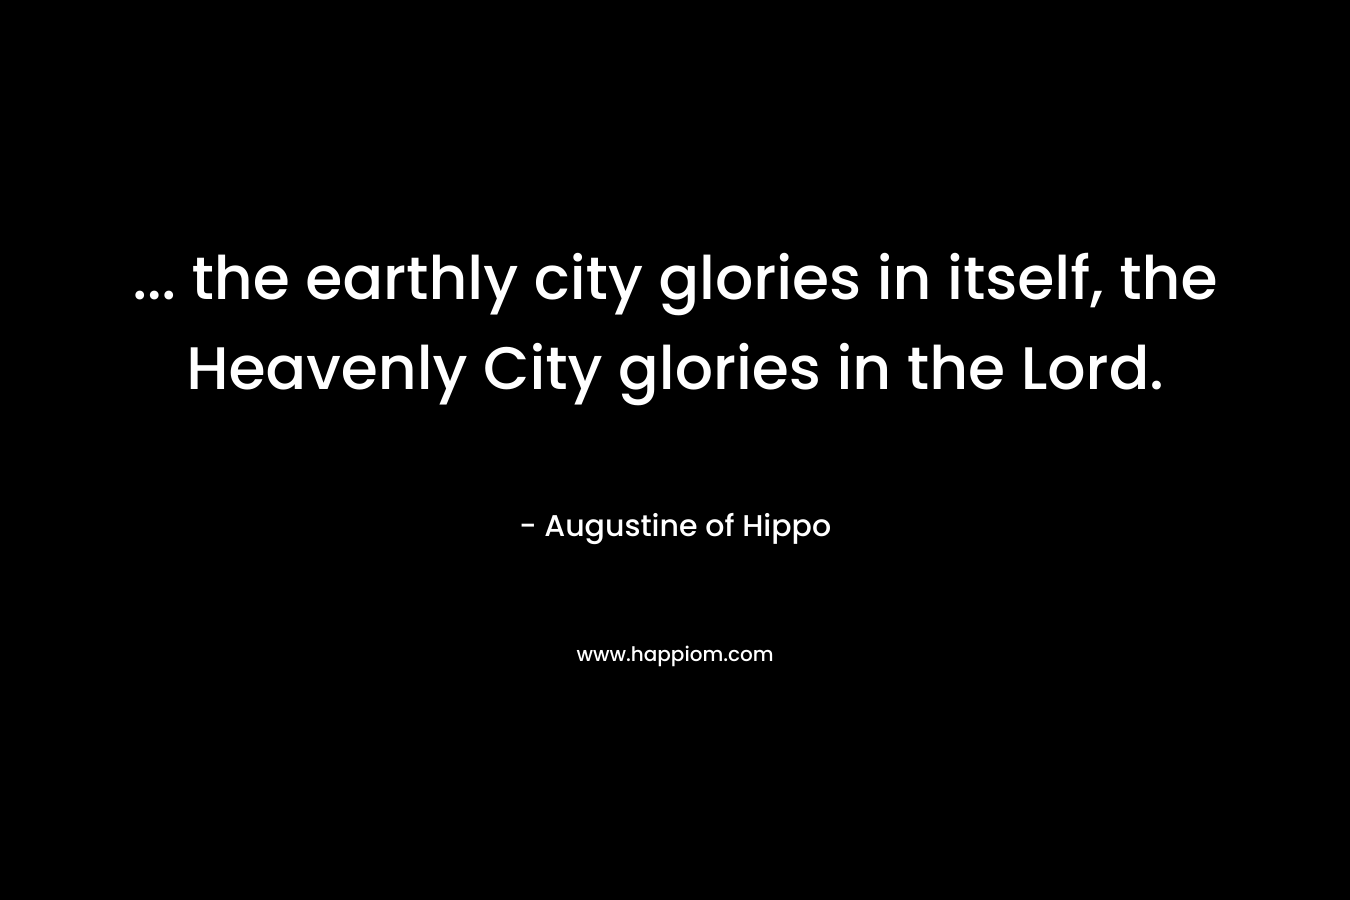 ... the earthly city glories in itself, the Heavenly City glories in the Lord.